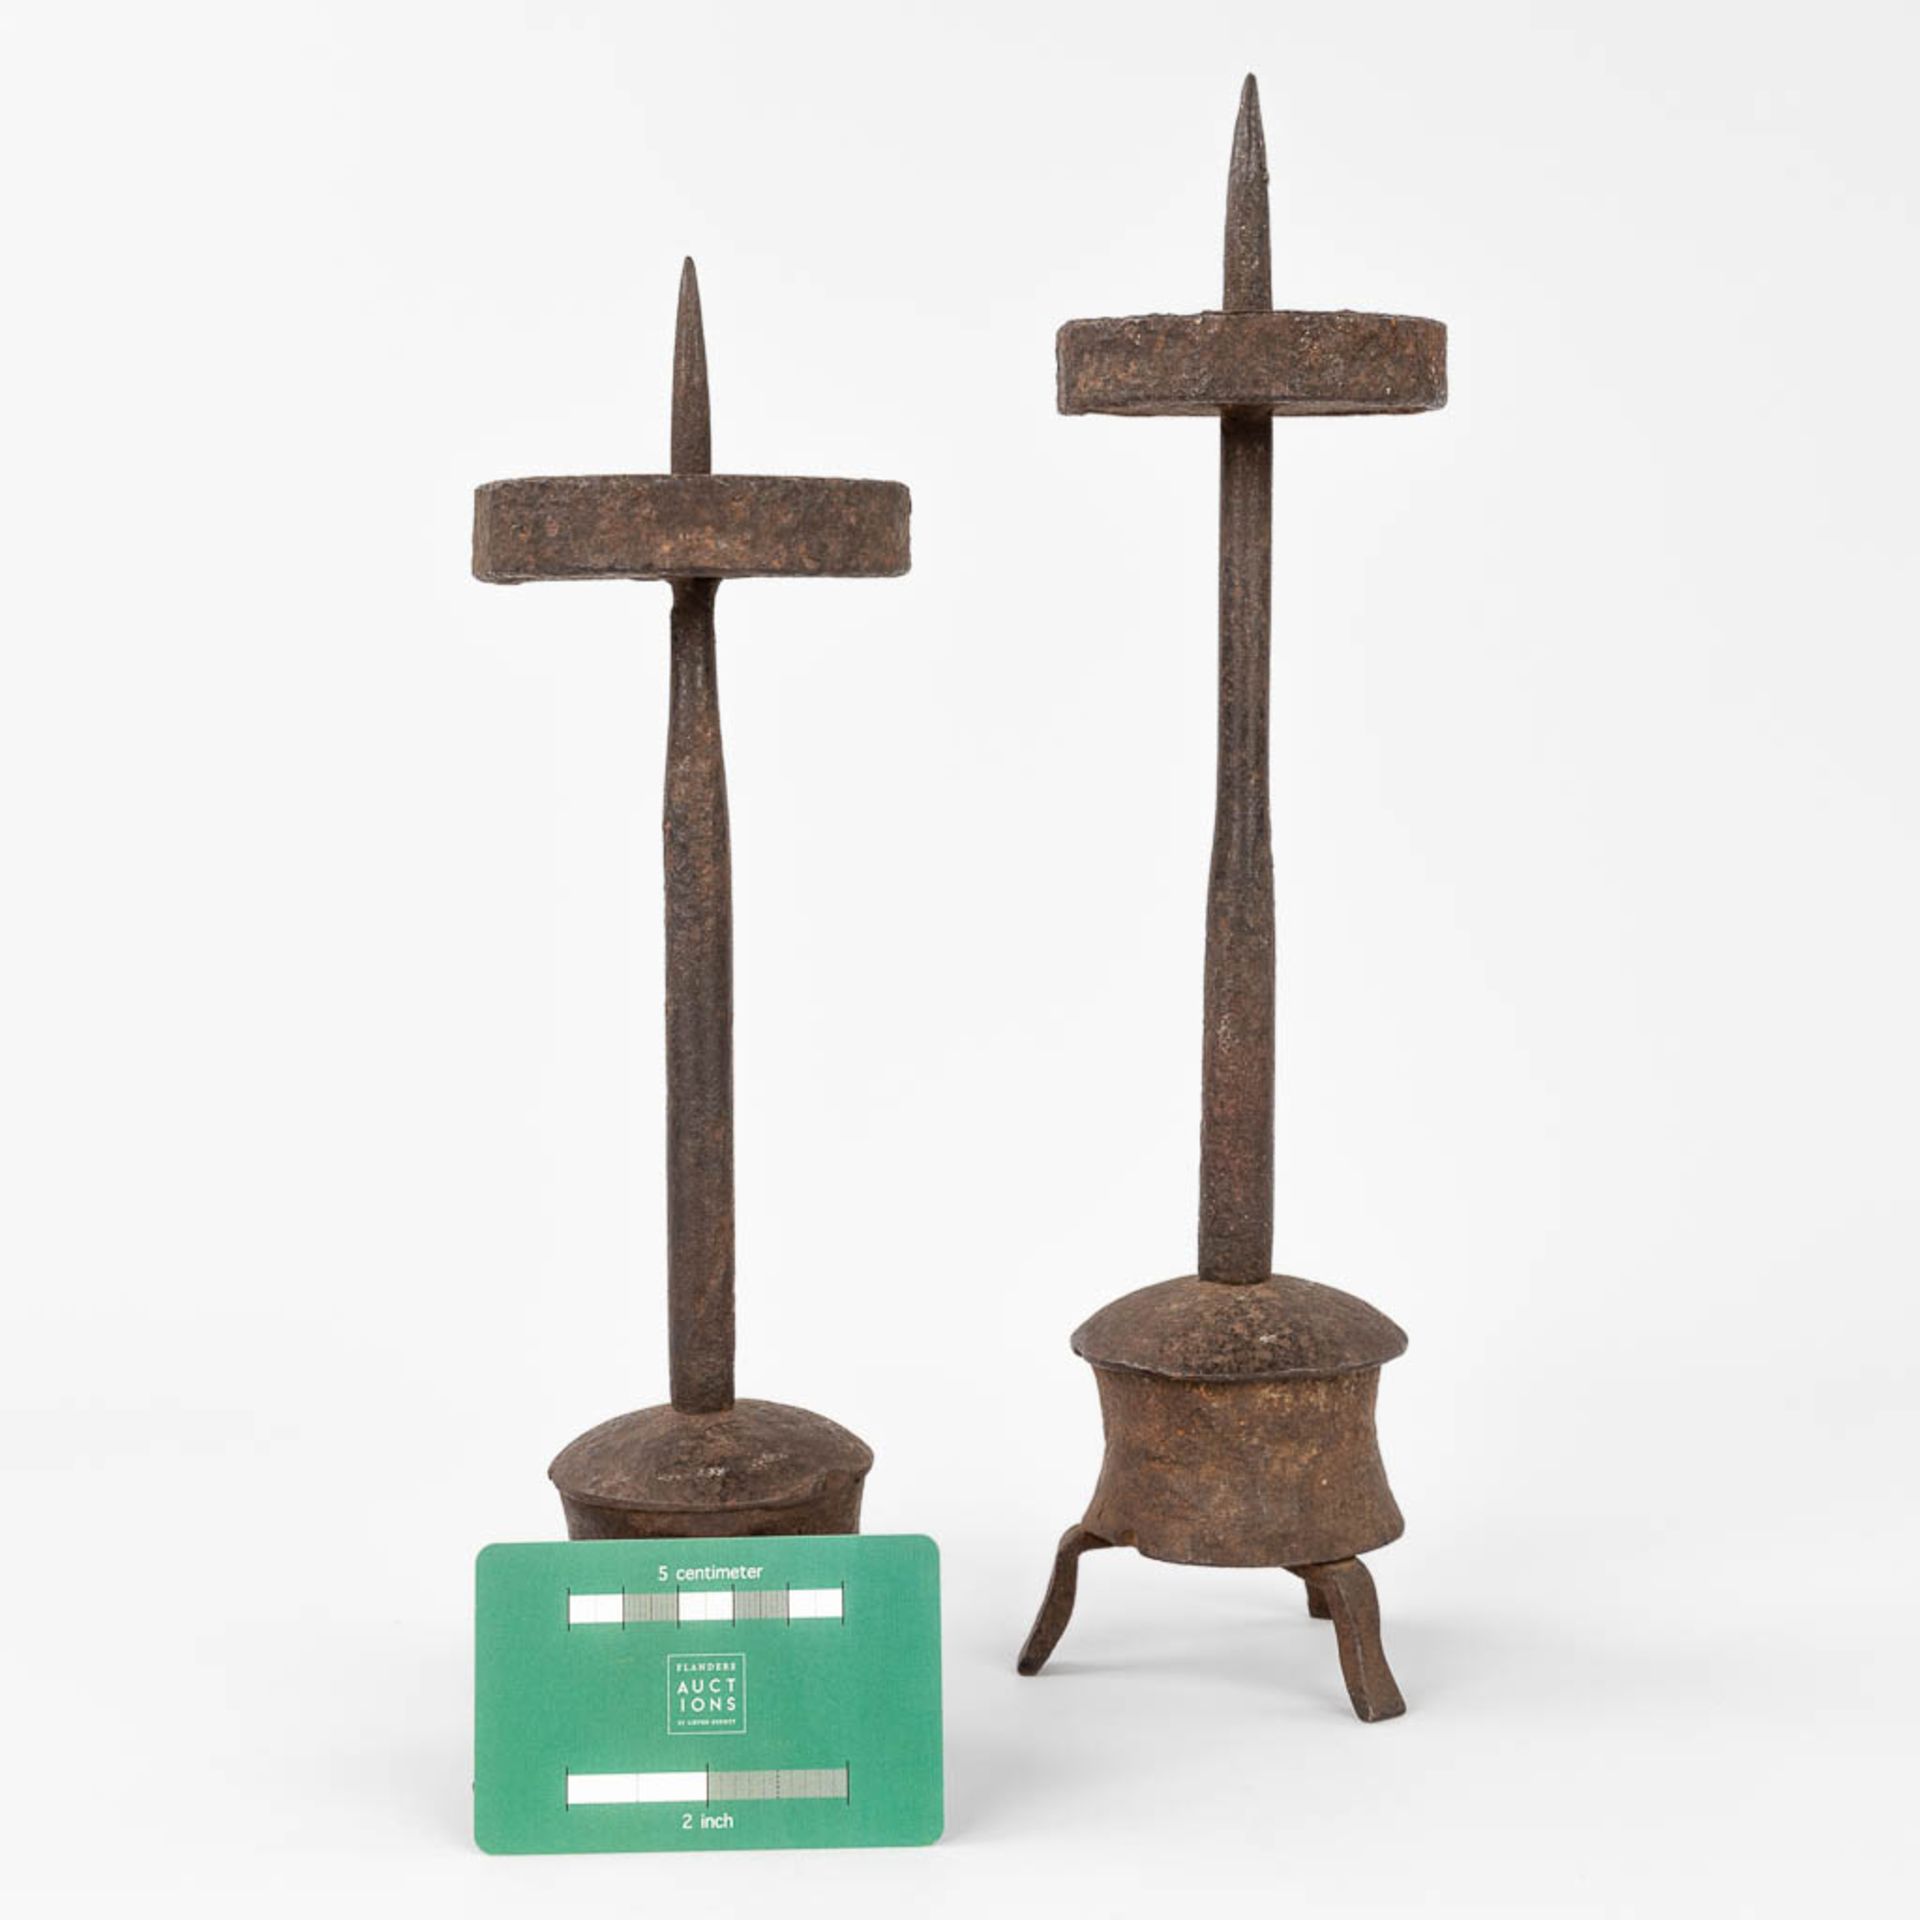 A pair of antique candlesticks made of wrought iron. Probably made in Southern Europe. (H:34 cm) - Image 2 of 16